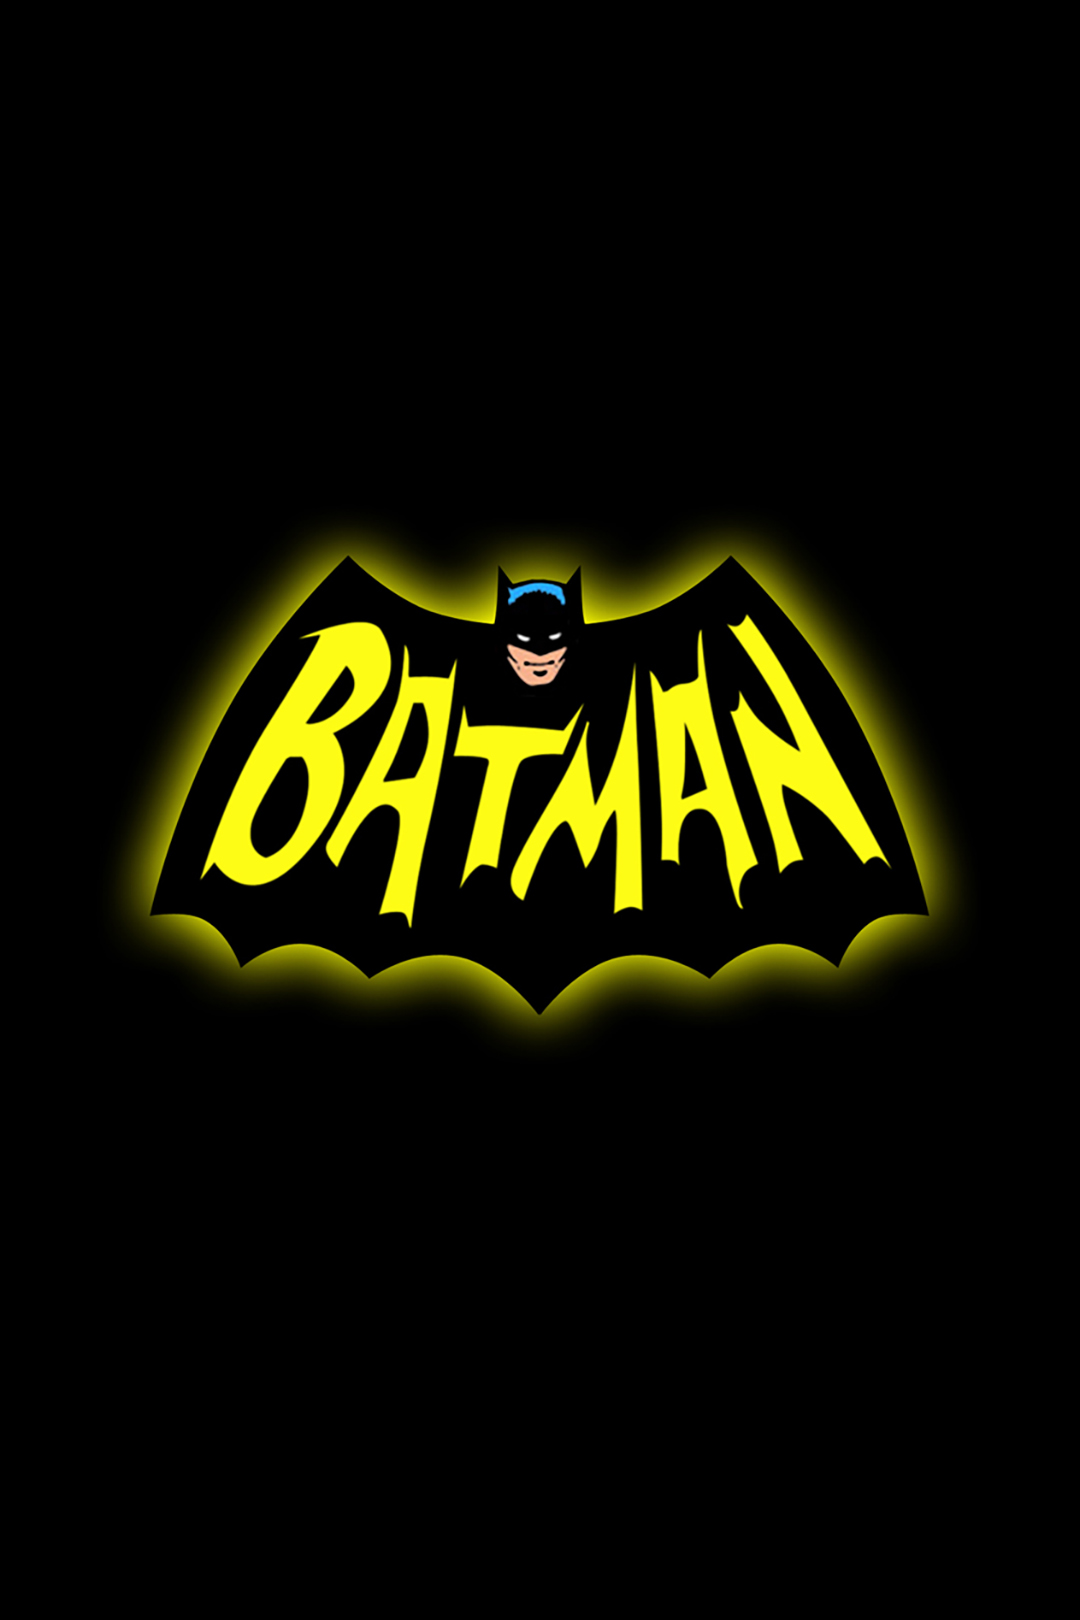 Batman - Where to Watch and Stream